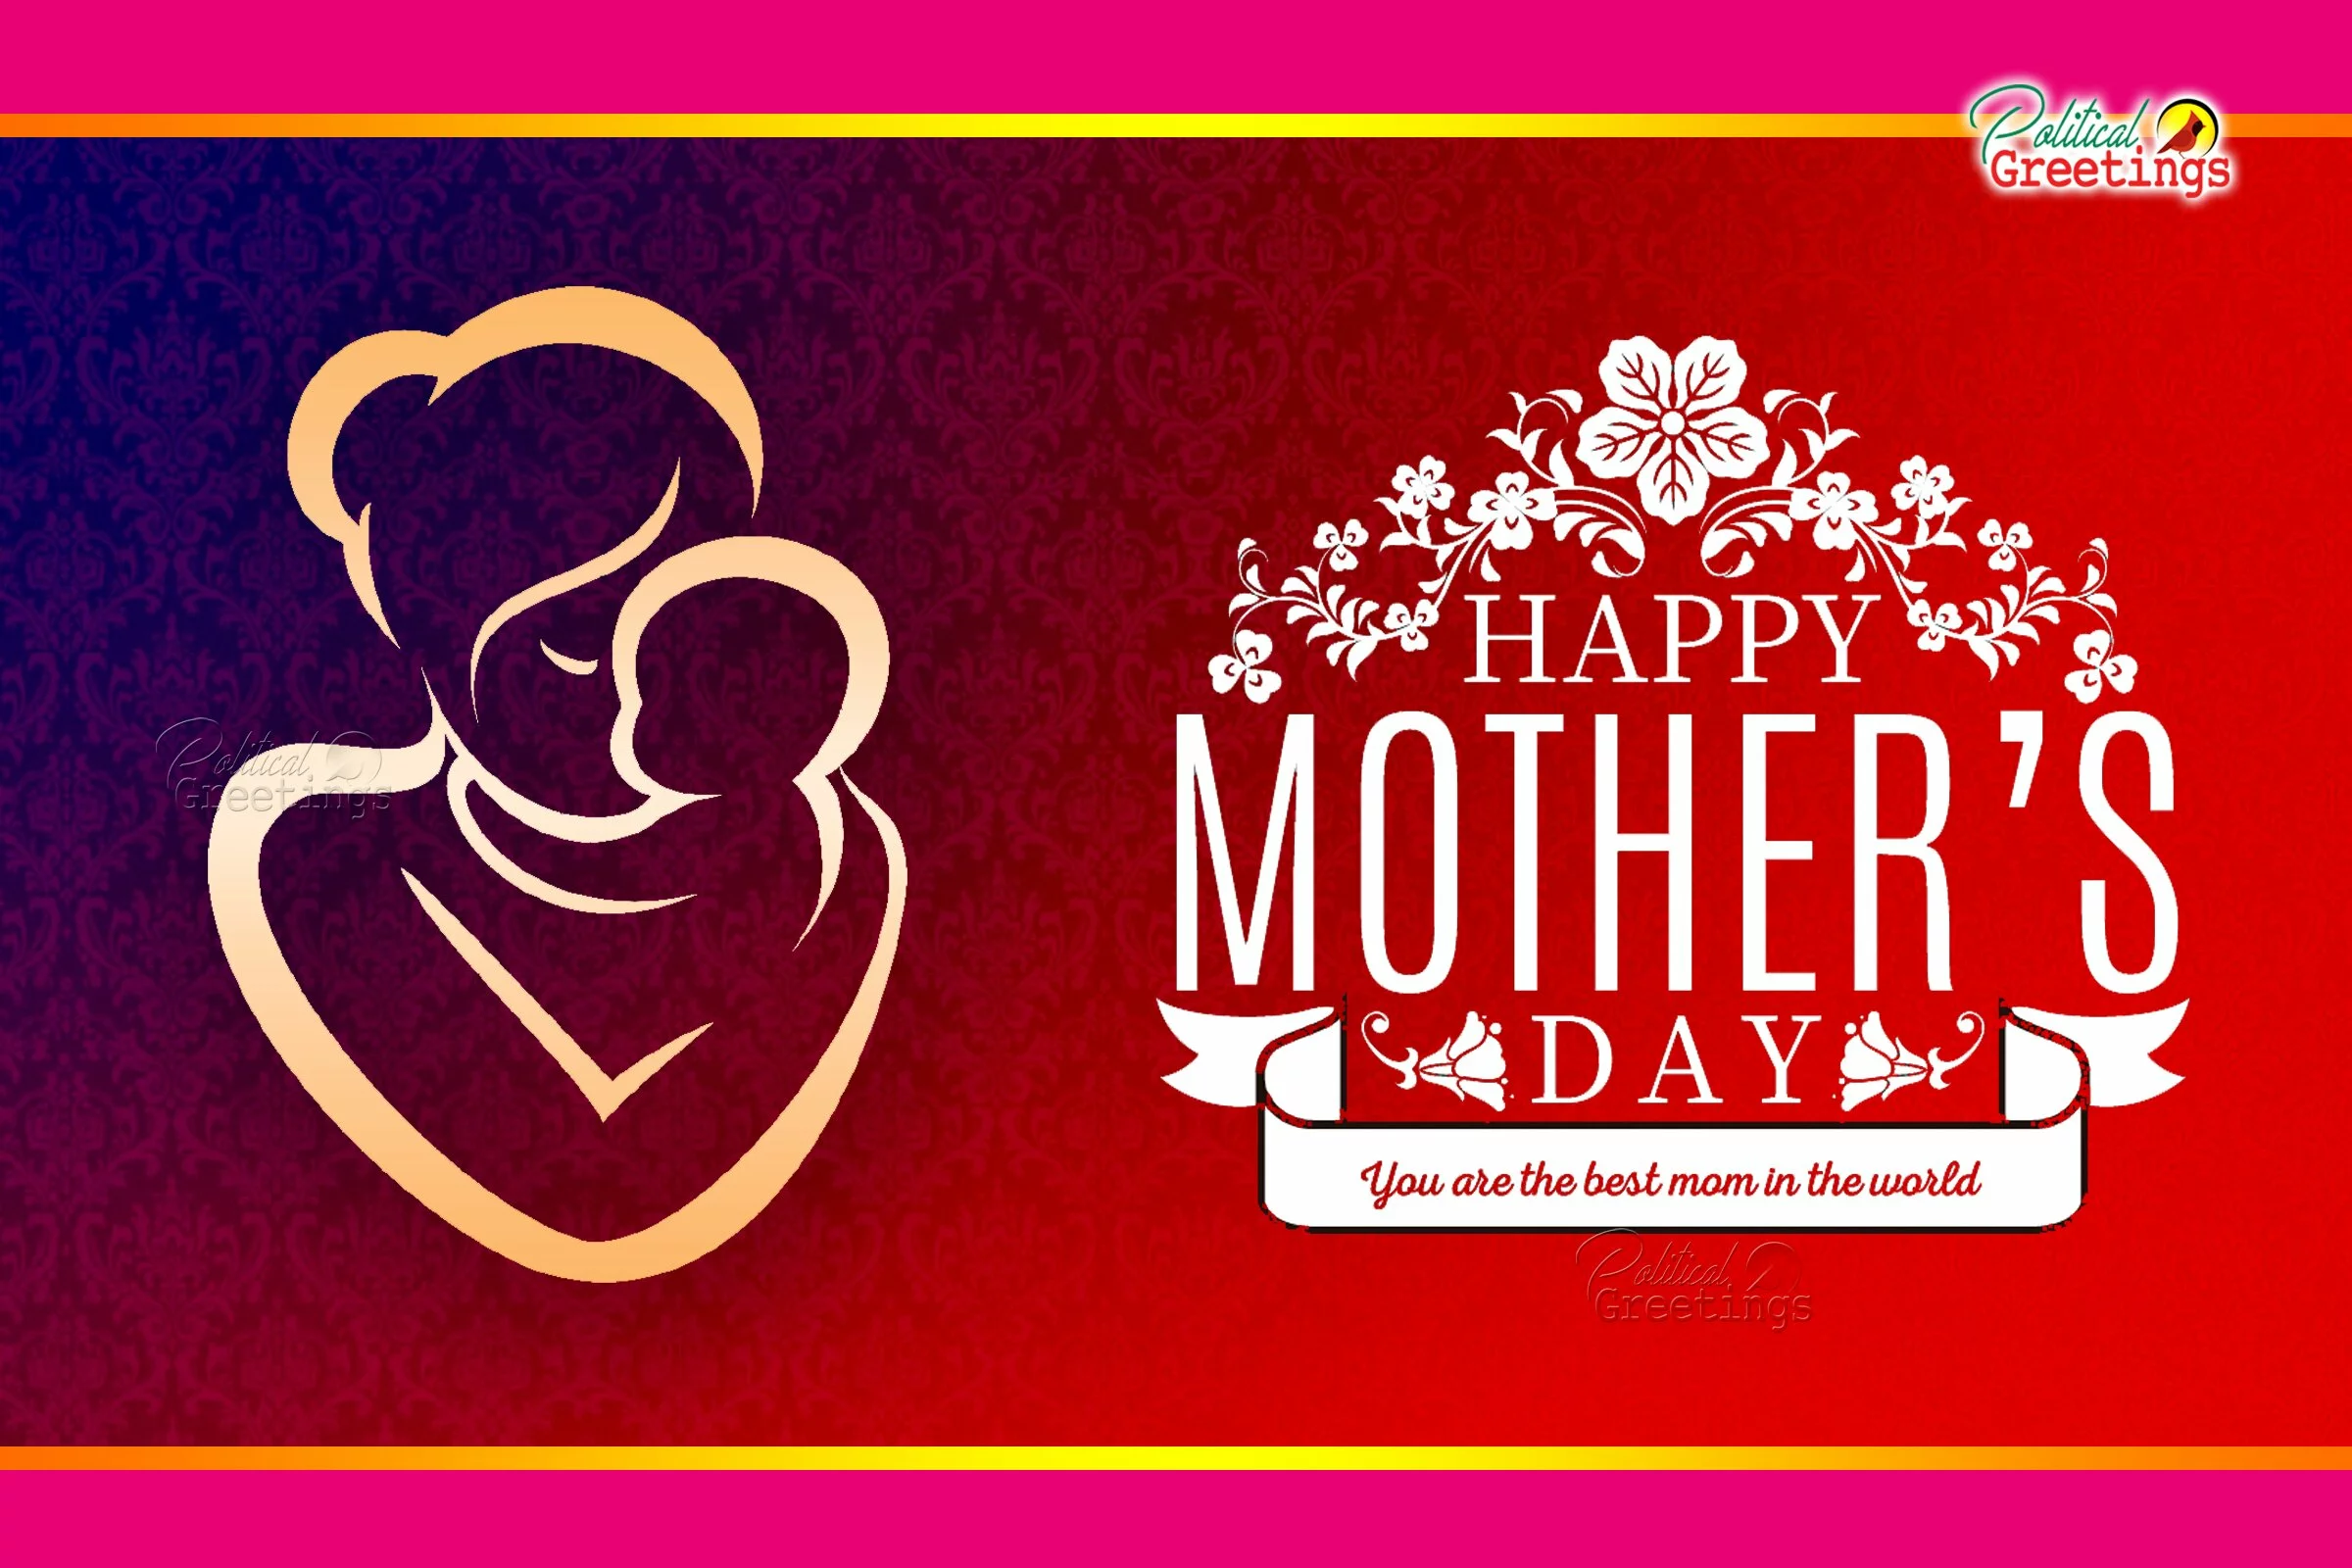 happy-mothers-day-telugu-quotes-wishes-greetings-images-politicalgreetings